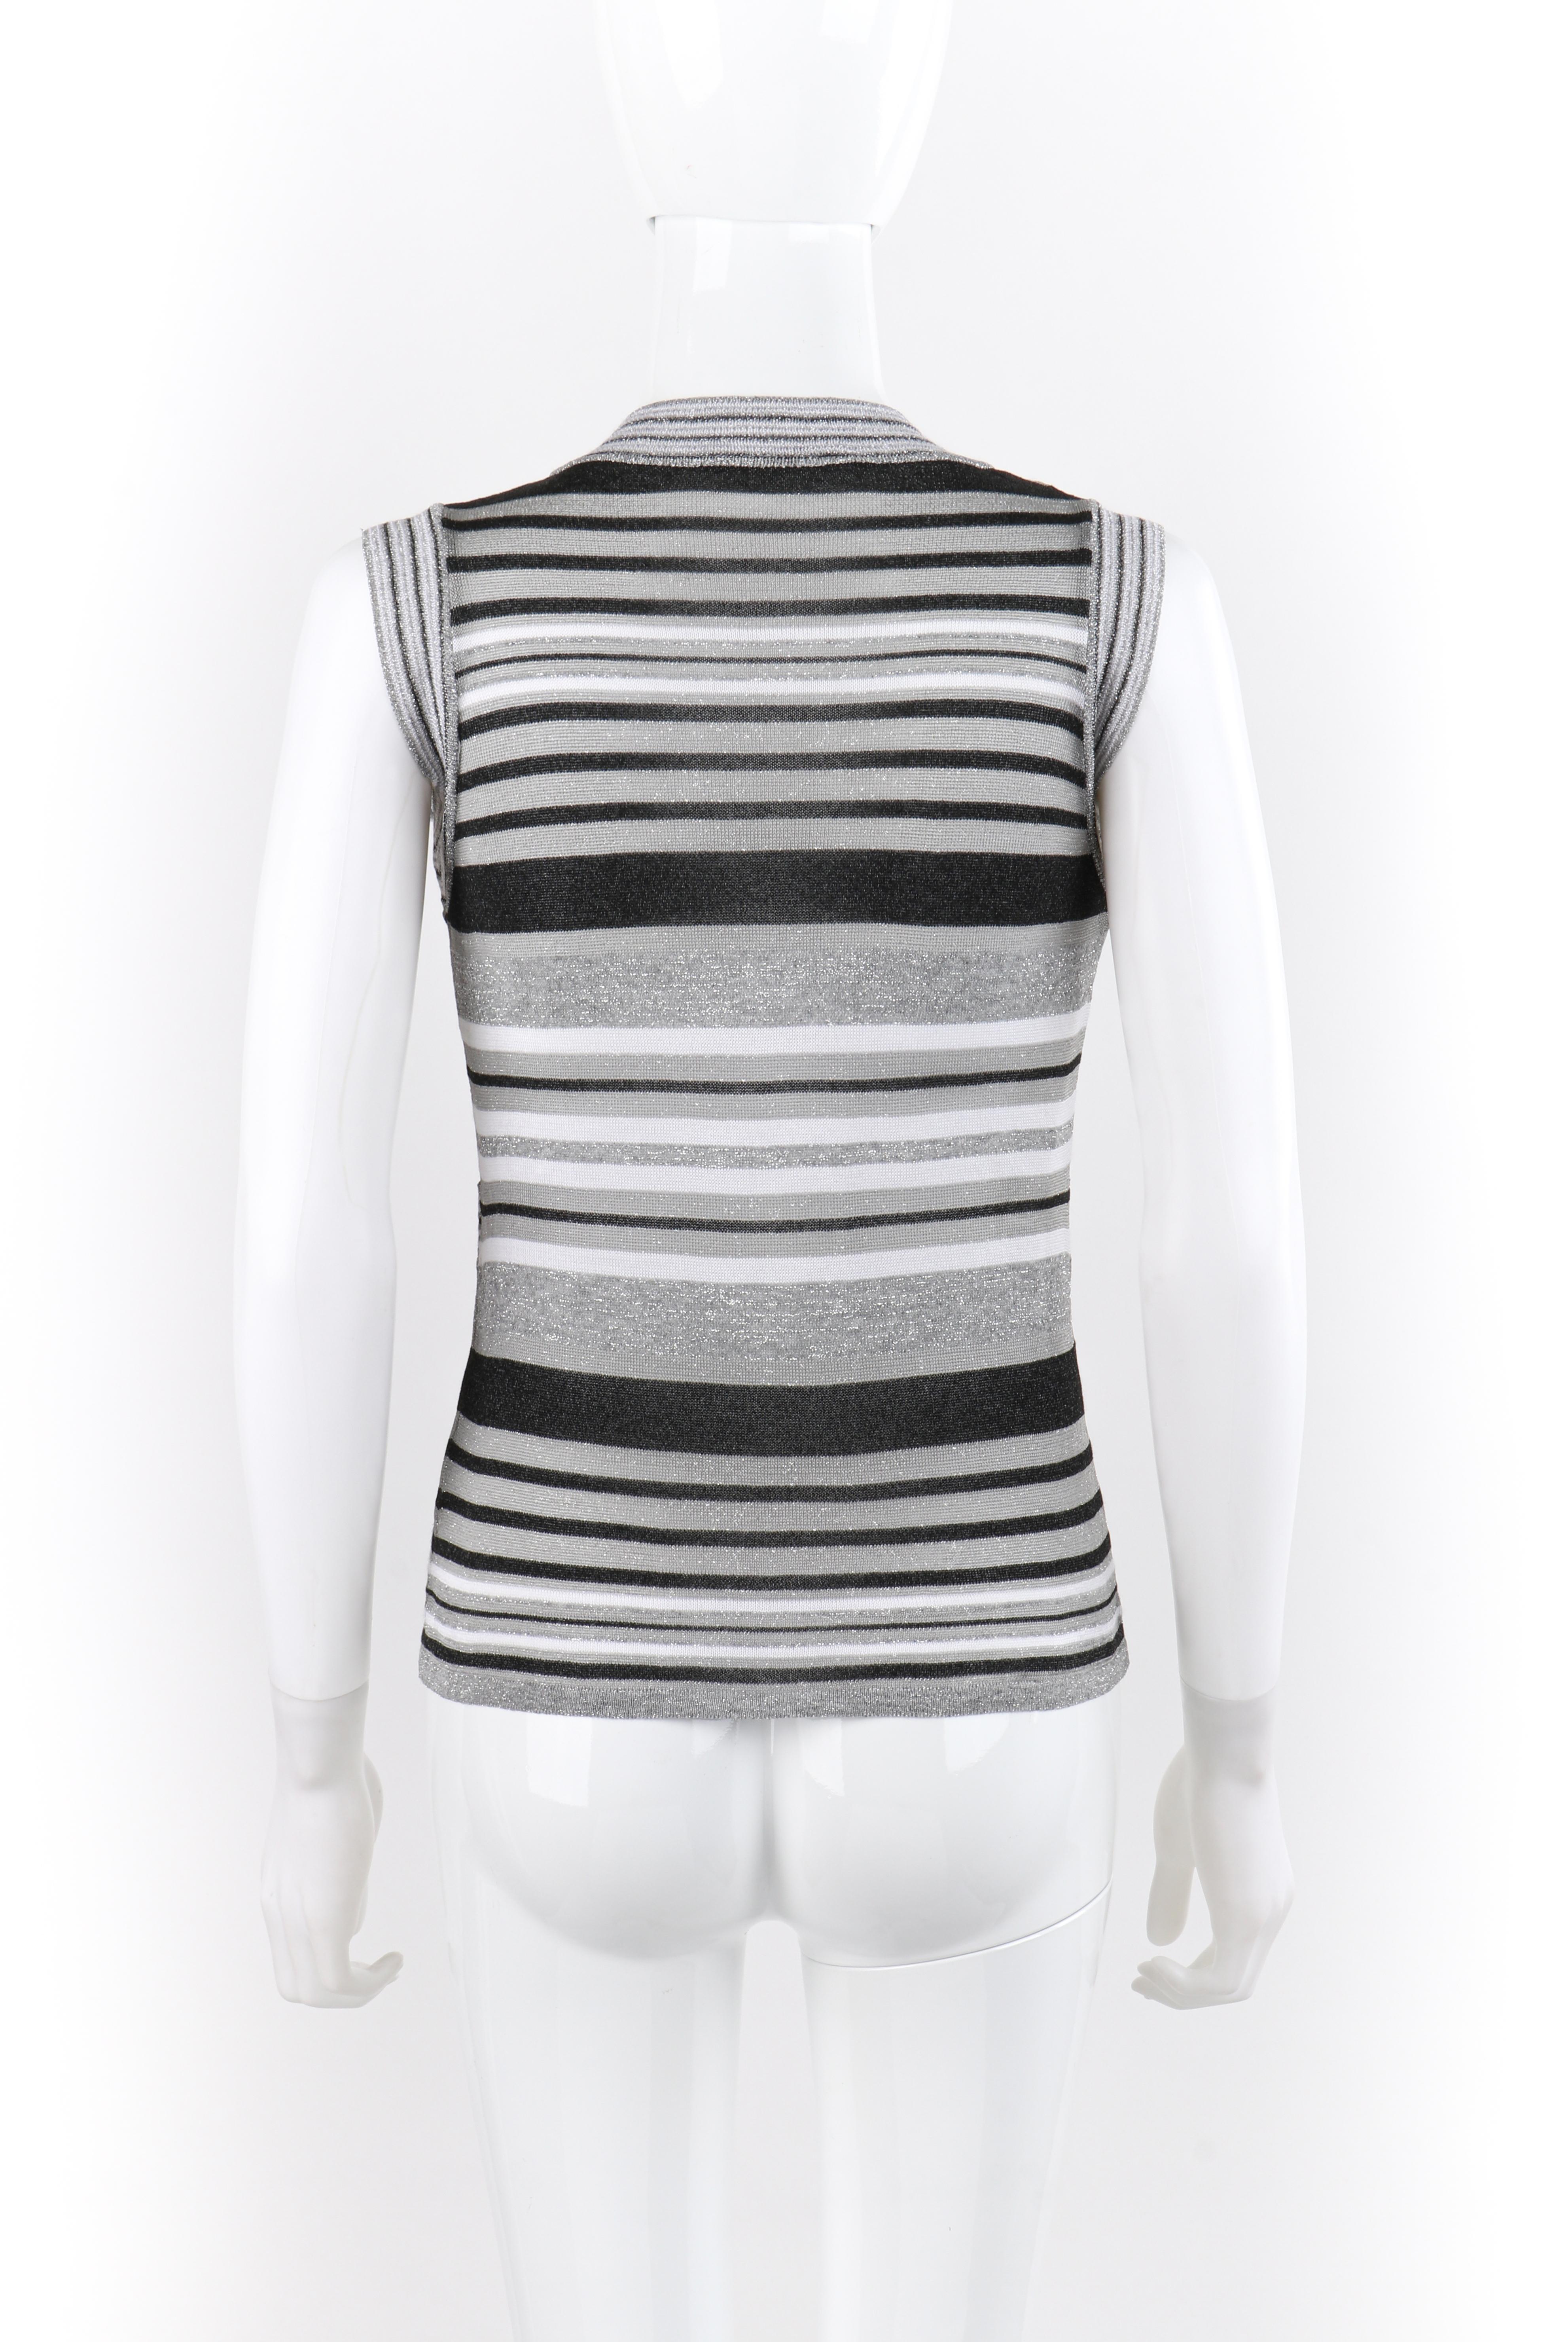 Gray ALEXANDER McQUEEN S/S 1996 “The Hunger” Metallic Striped V-Neck Knit Tank Top For Sale